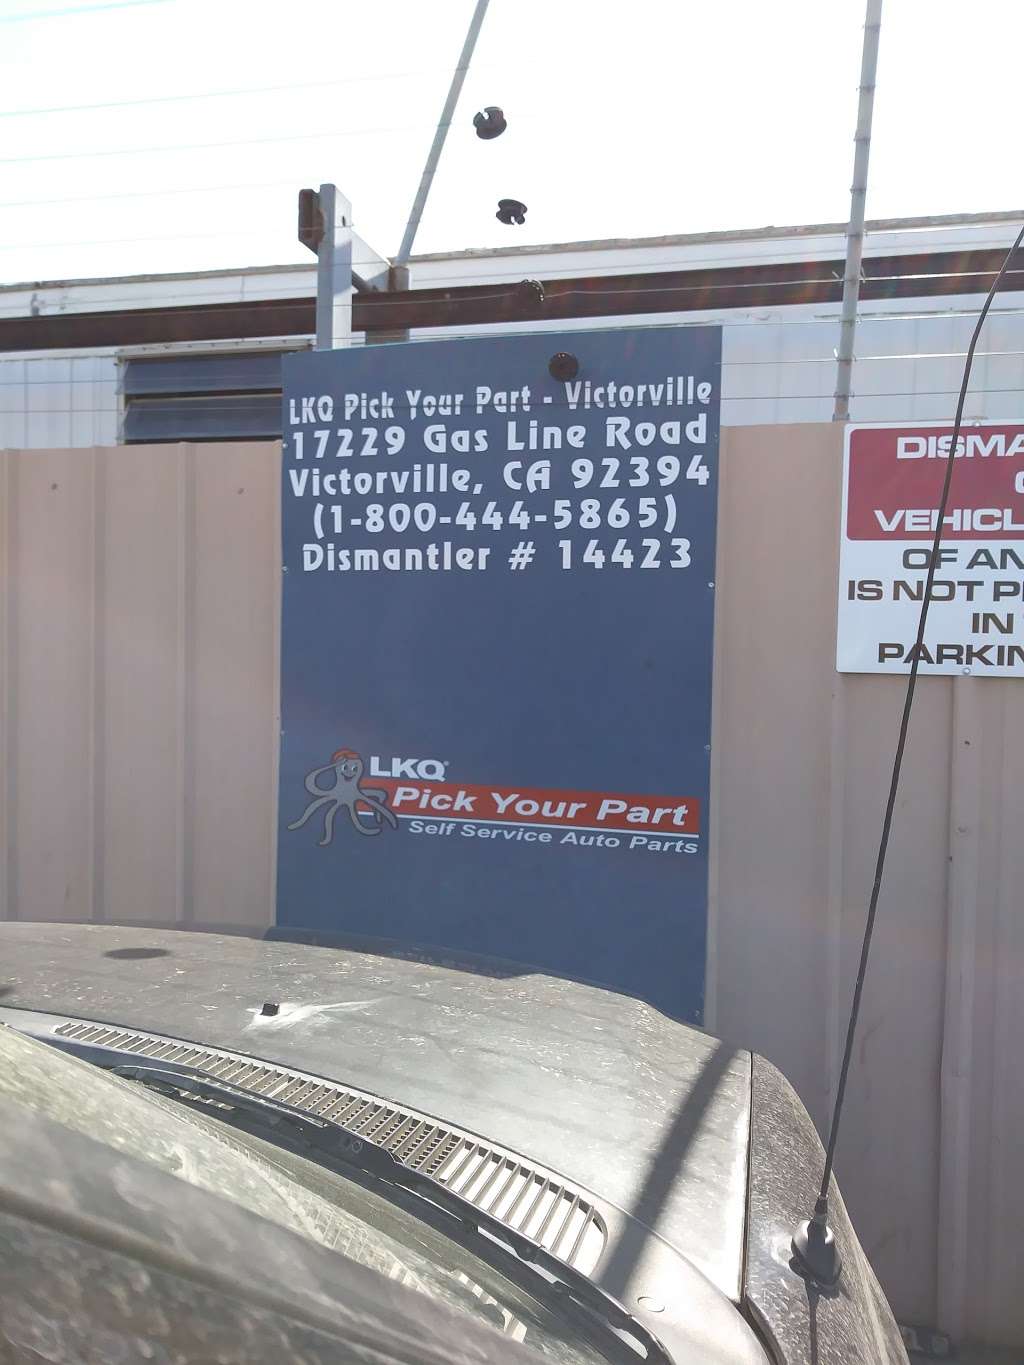 Pick & Pull Auto Parts | Photo 9 of 10 | Address: 17229 Gas Line Rd, Victorville, CA 92394, USA | Phone: (760) 241-8414